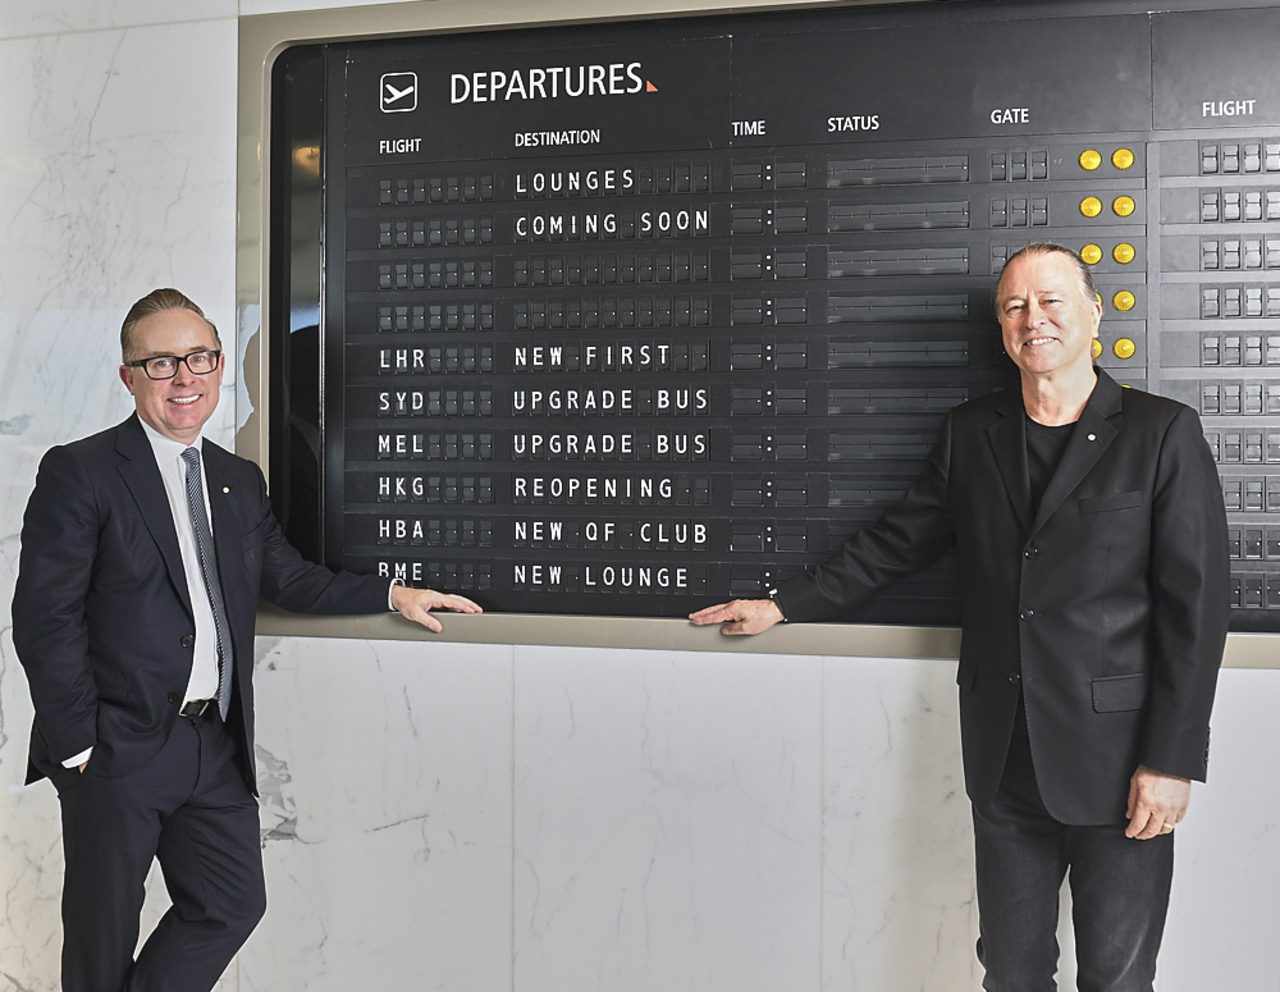 Qantas execs with a departure board showing new lounge openings.